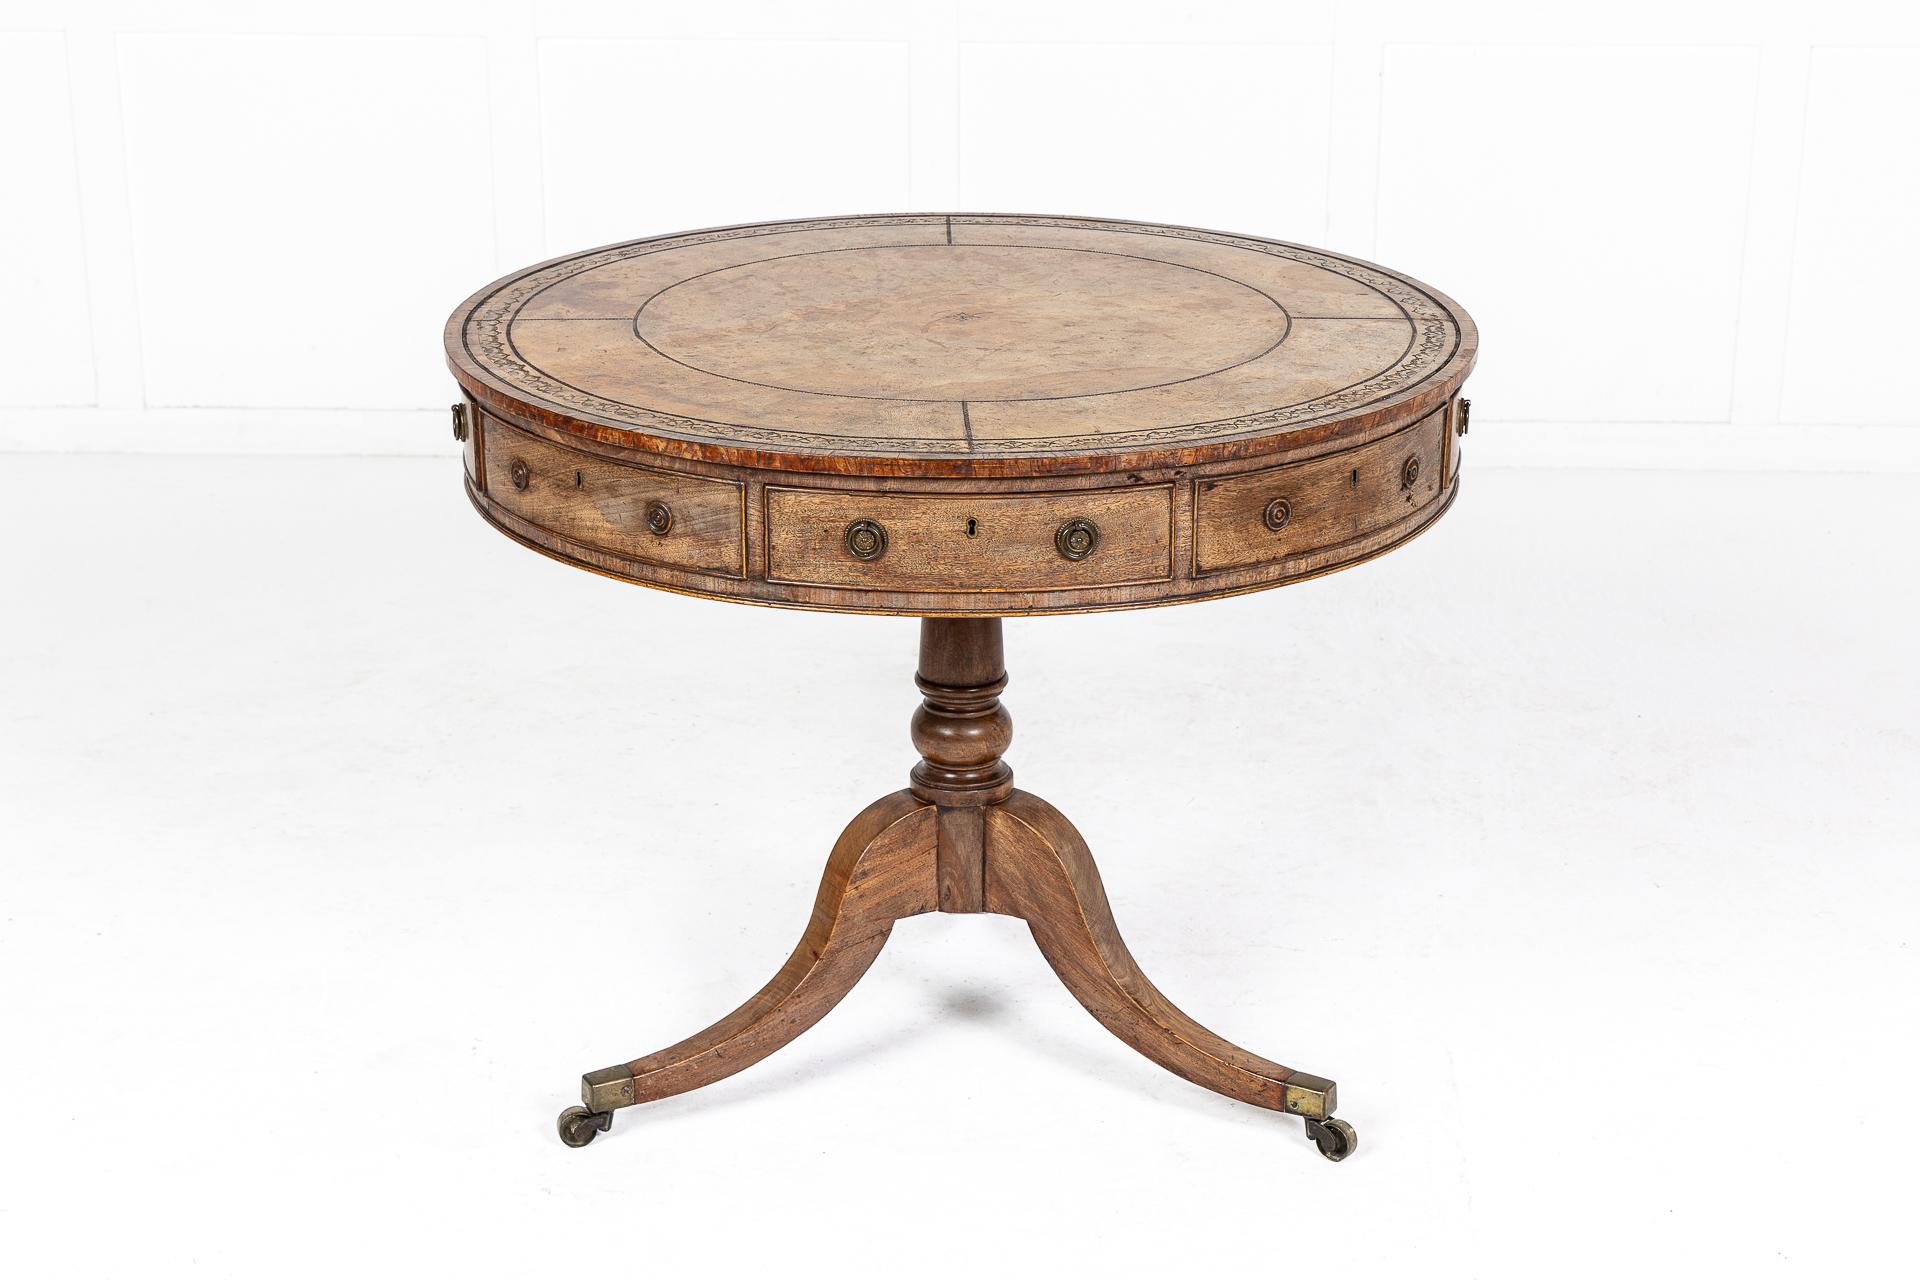 A 19th century English Regency mahogany, revolving drum table having a beautiful, original tooled leather segmented top with a burr yew cross banded edge. Having an arrangement of four oak lined drawers and four false ones, with brass handles.